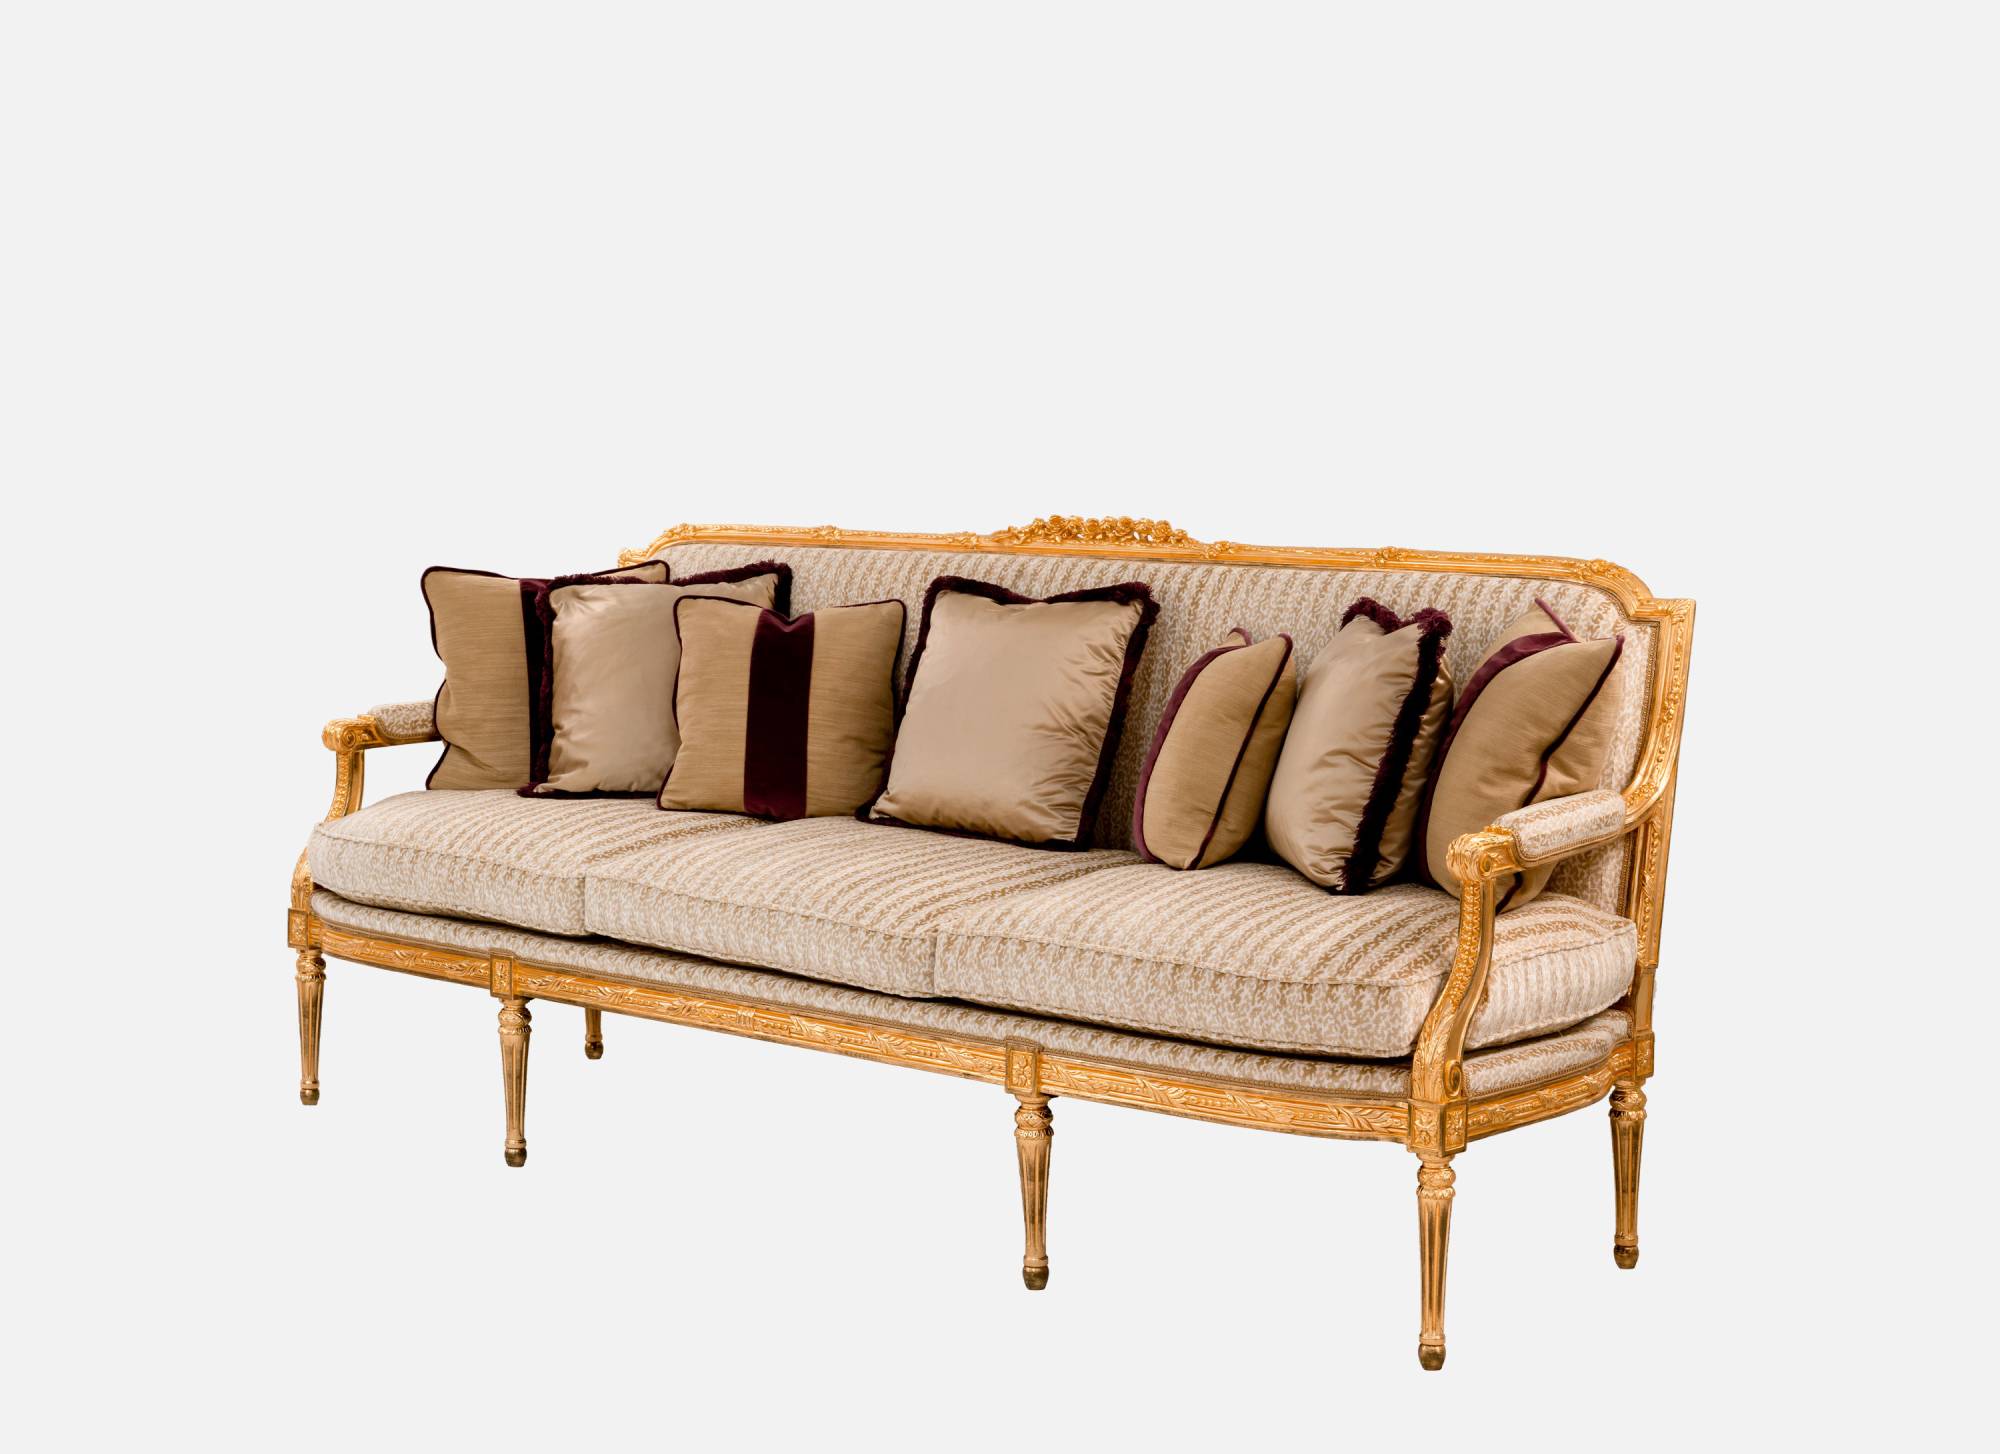 ART. 1049-3 – Discover the elegance of luxury classic Sofas made in Italy by C.G. Capelletti. Luxury classic furniture that combines style and craftsmanship.